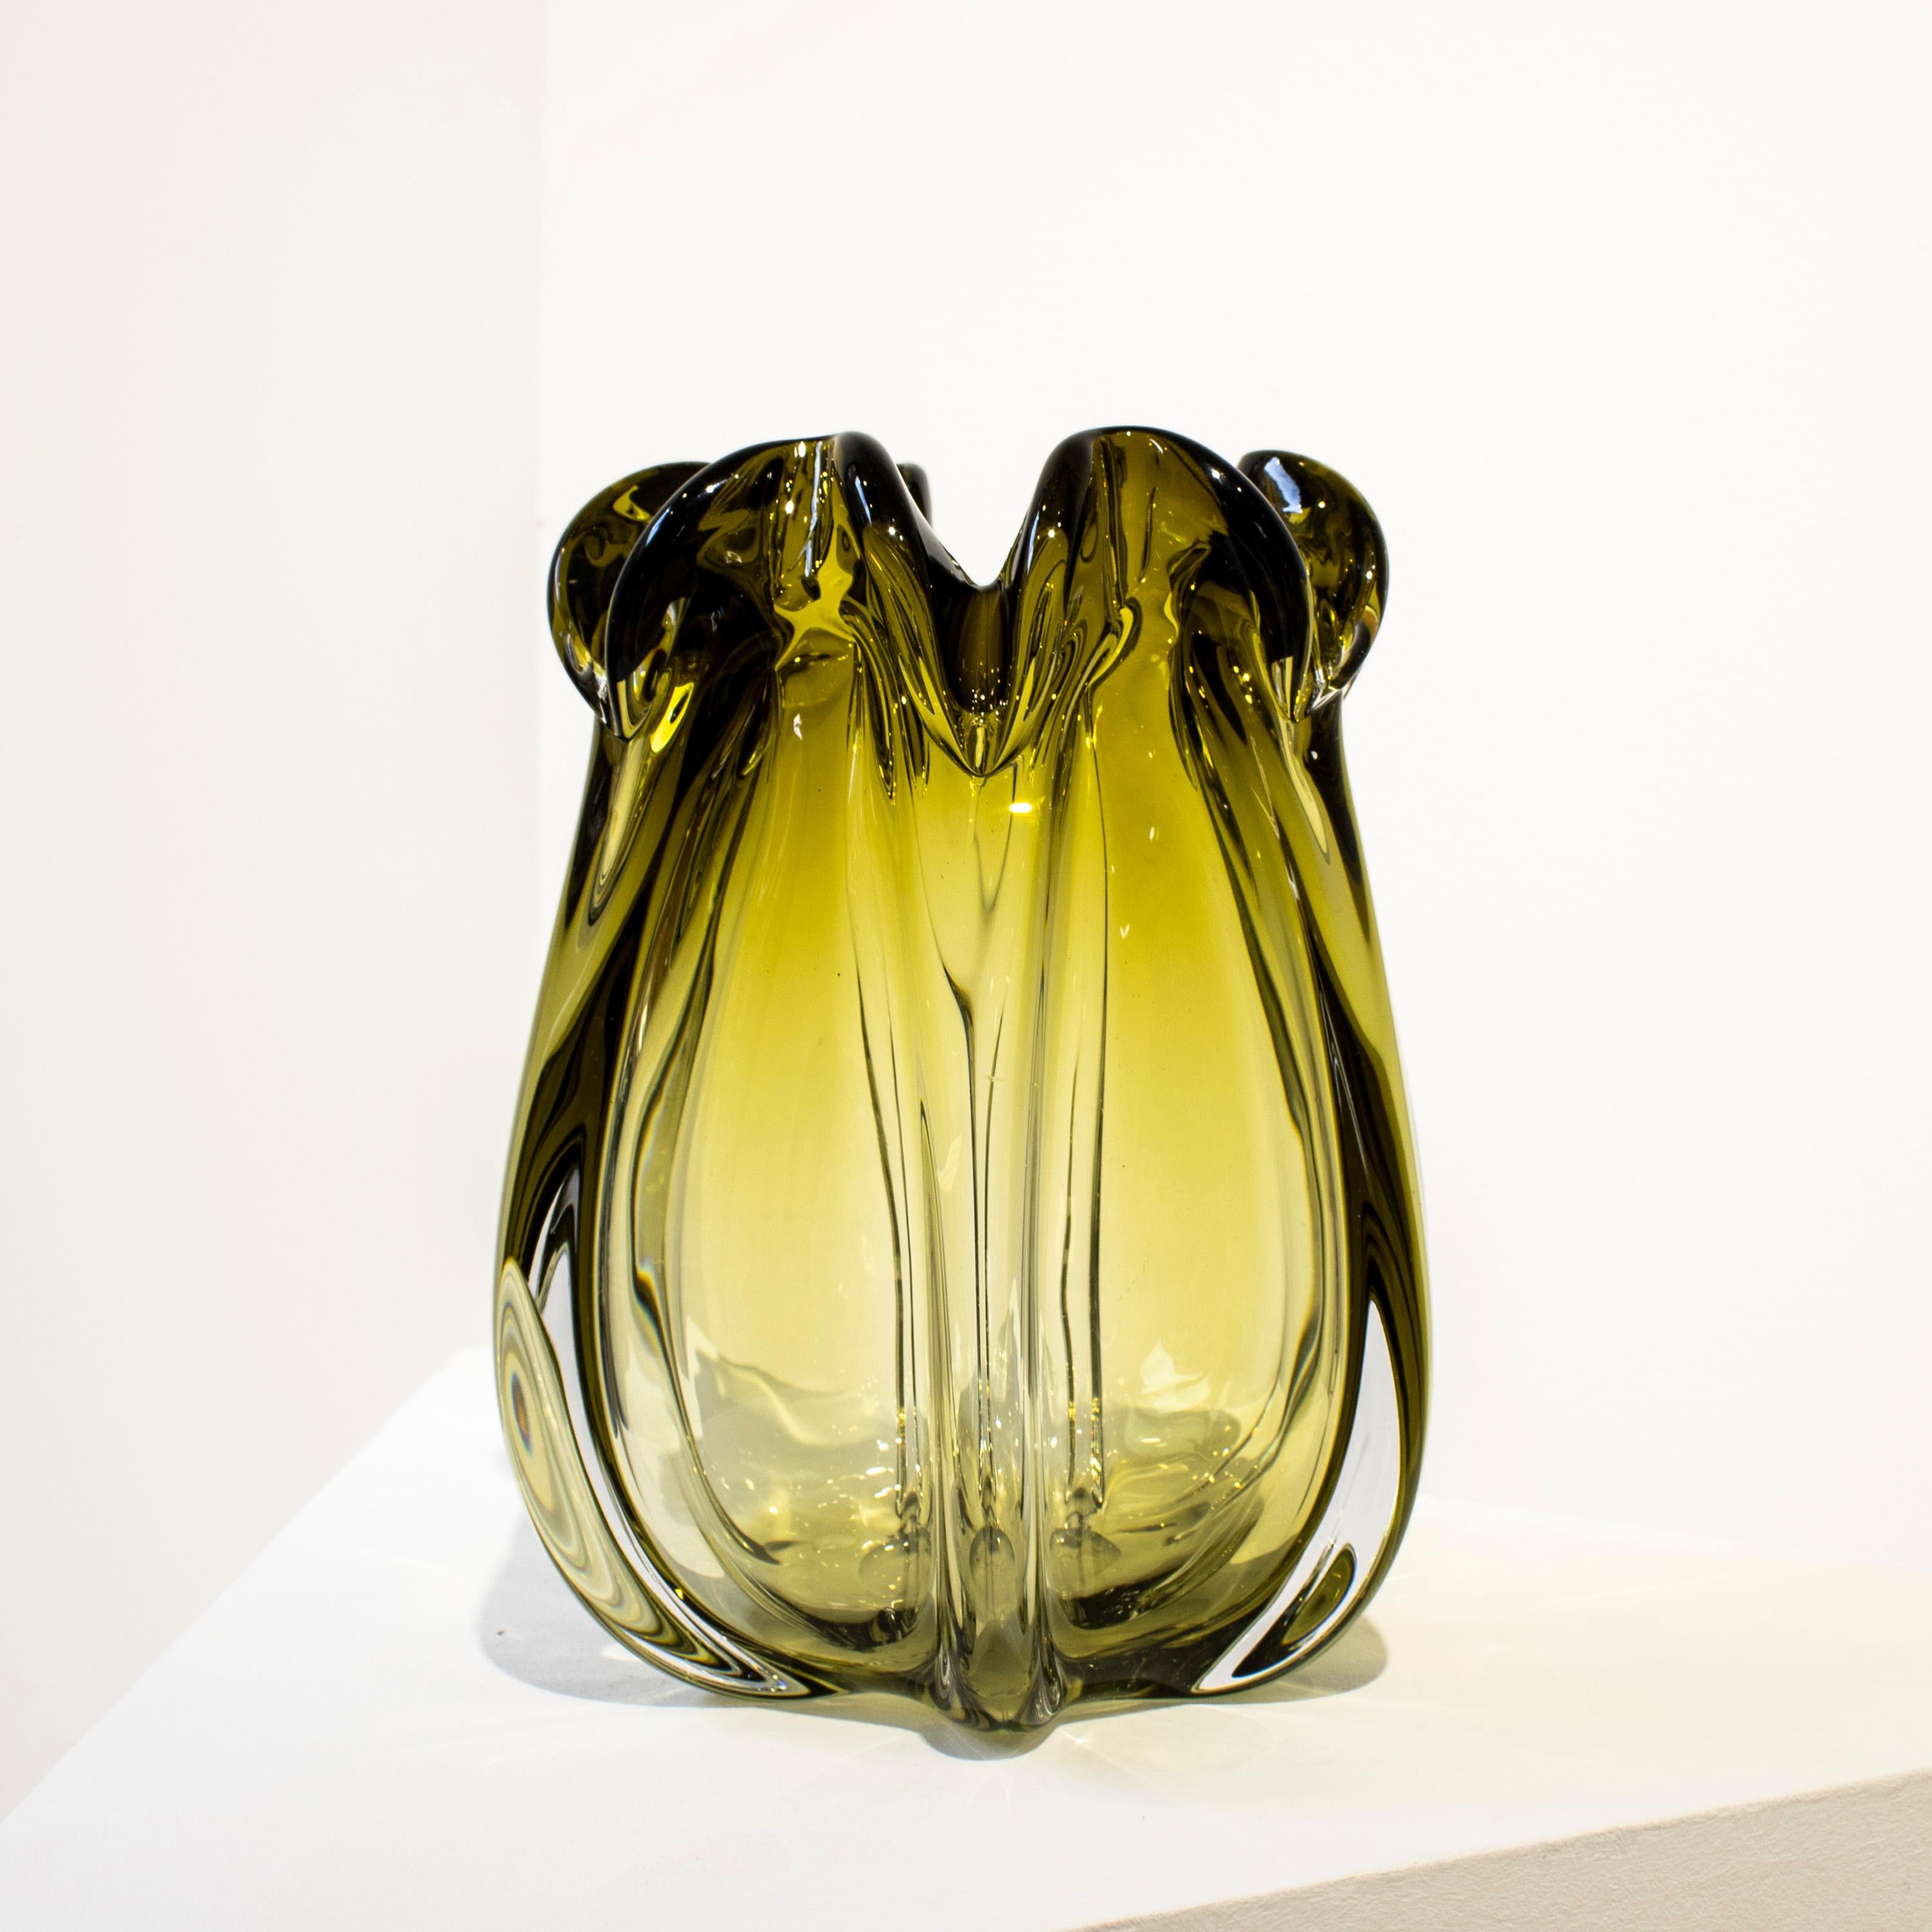 Hand-blown Italian ambar semi-transparent glass vase, with organic shapes inspired by nature. 